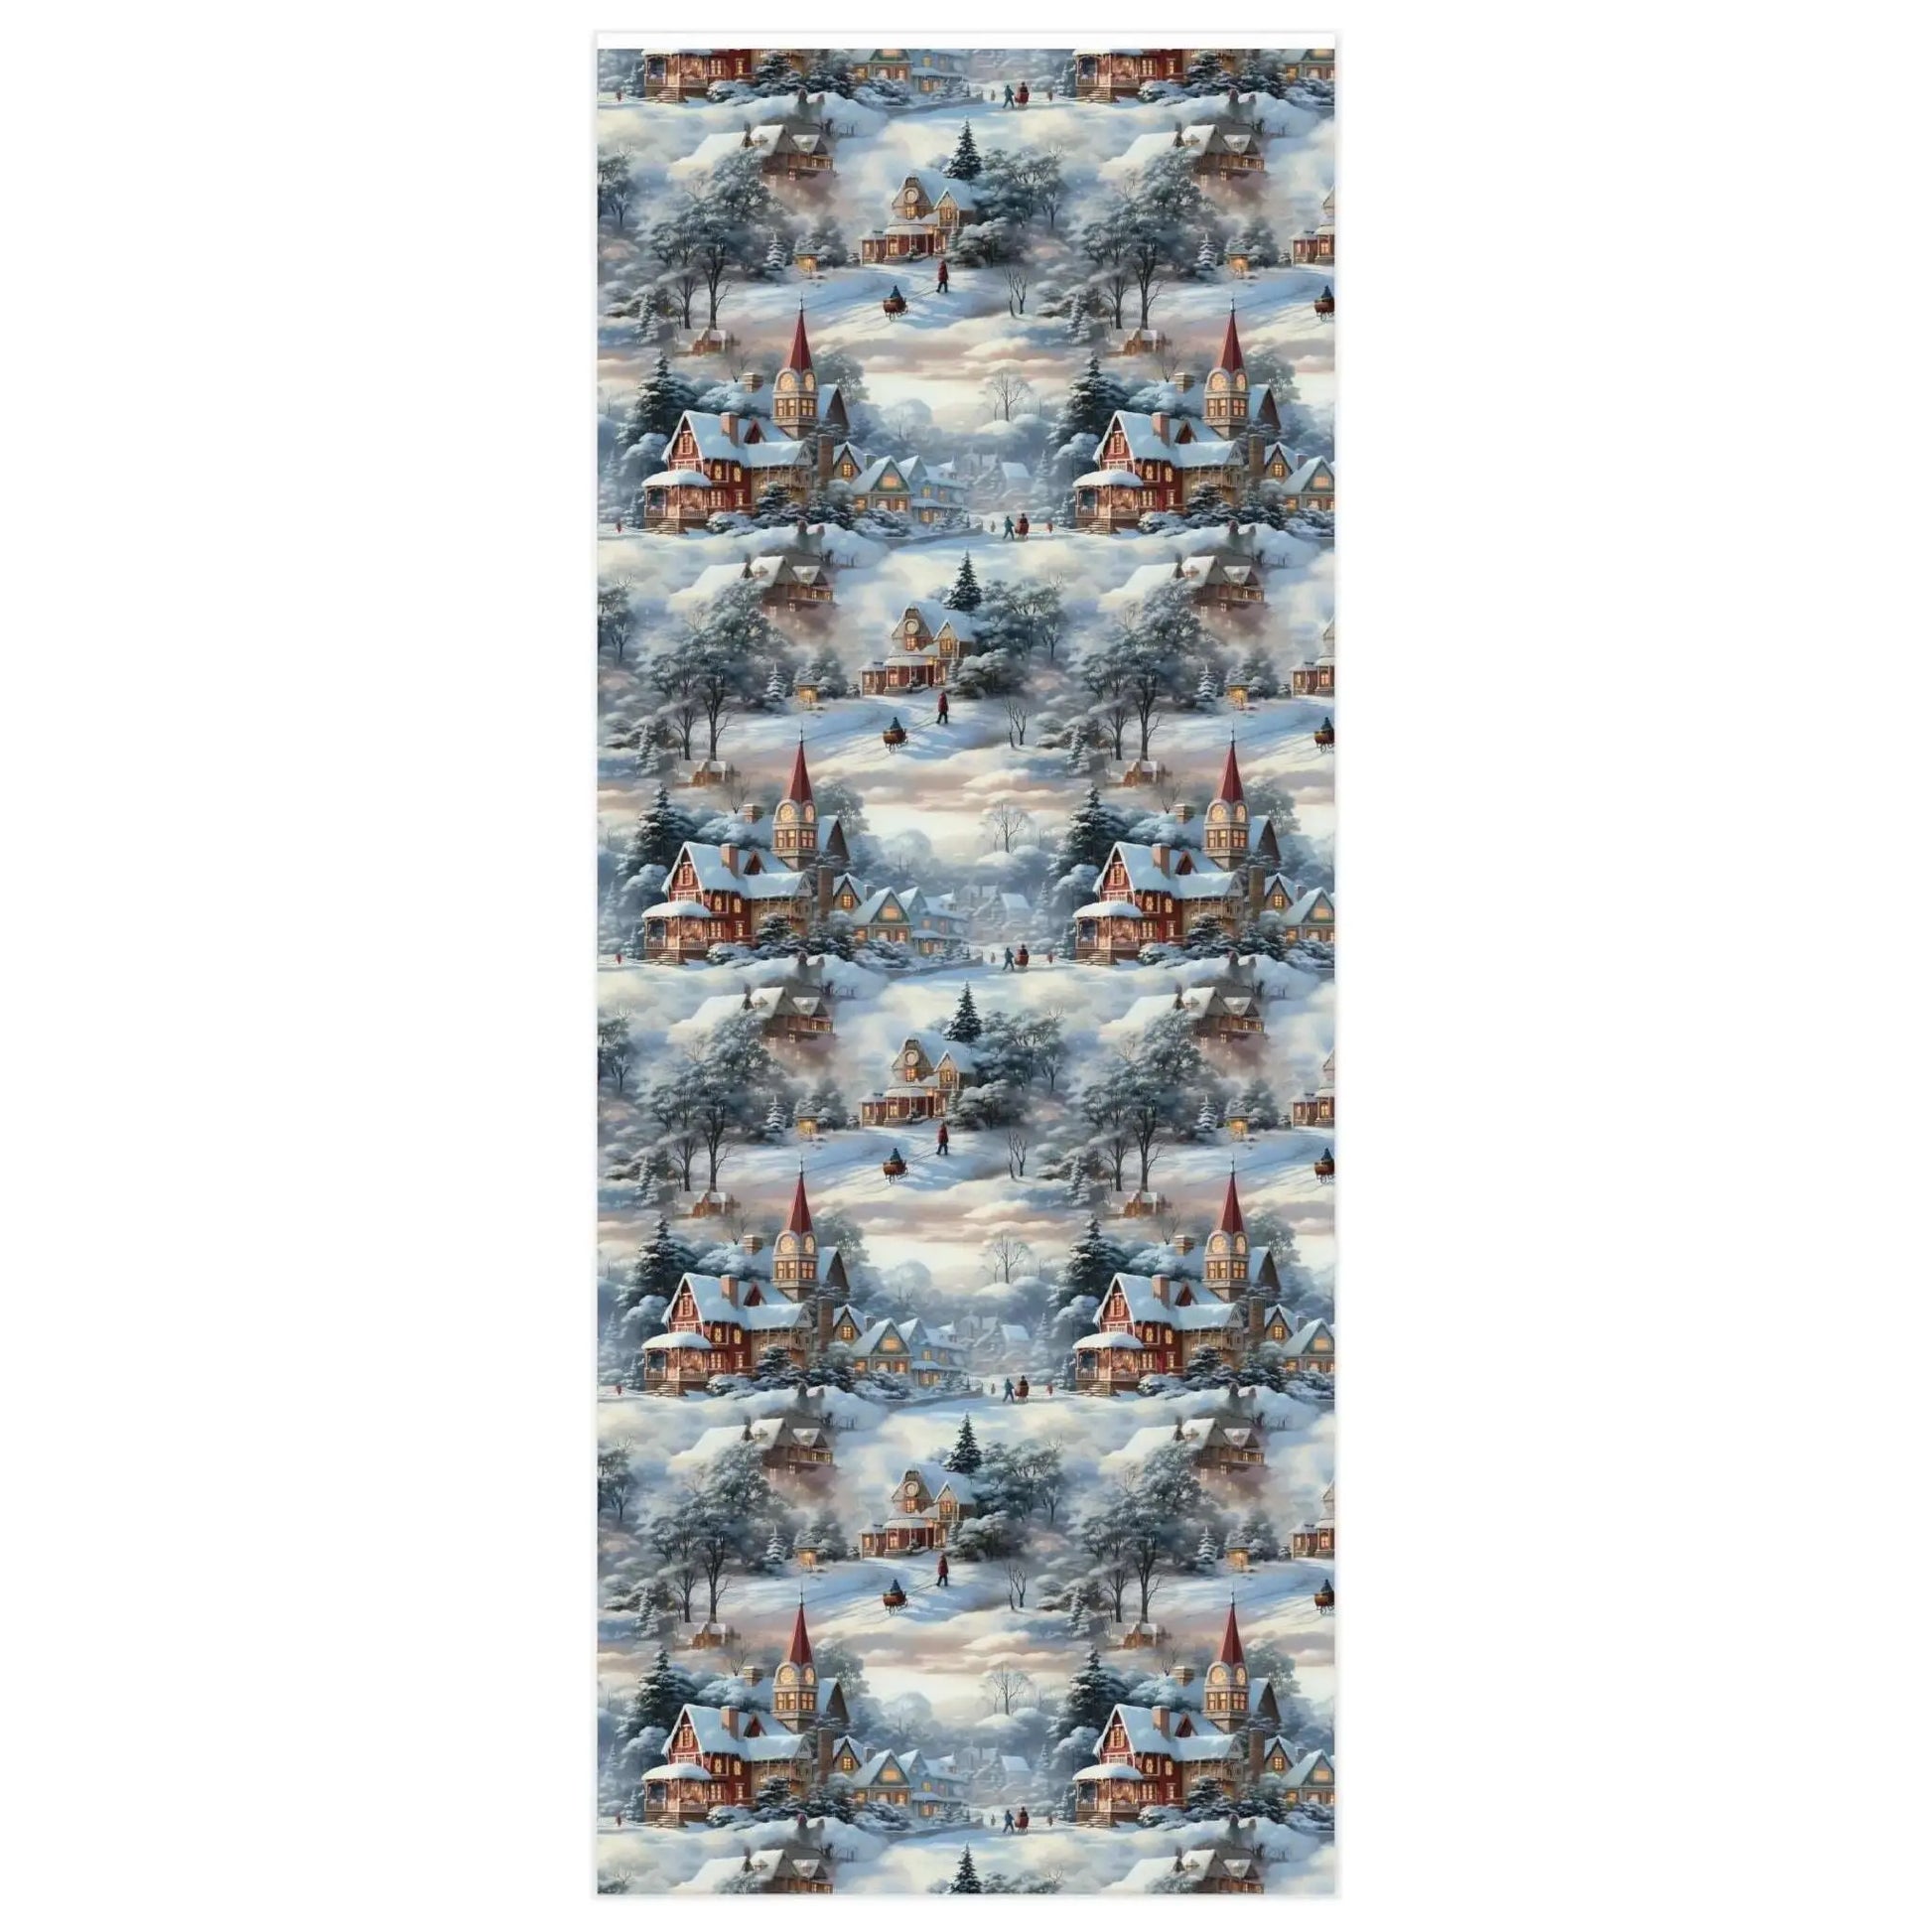 Small Town Vintage Christmas Wrapping Paper Rolls - The Curated Goose